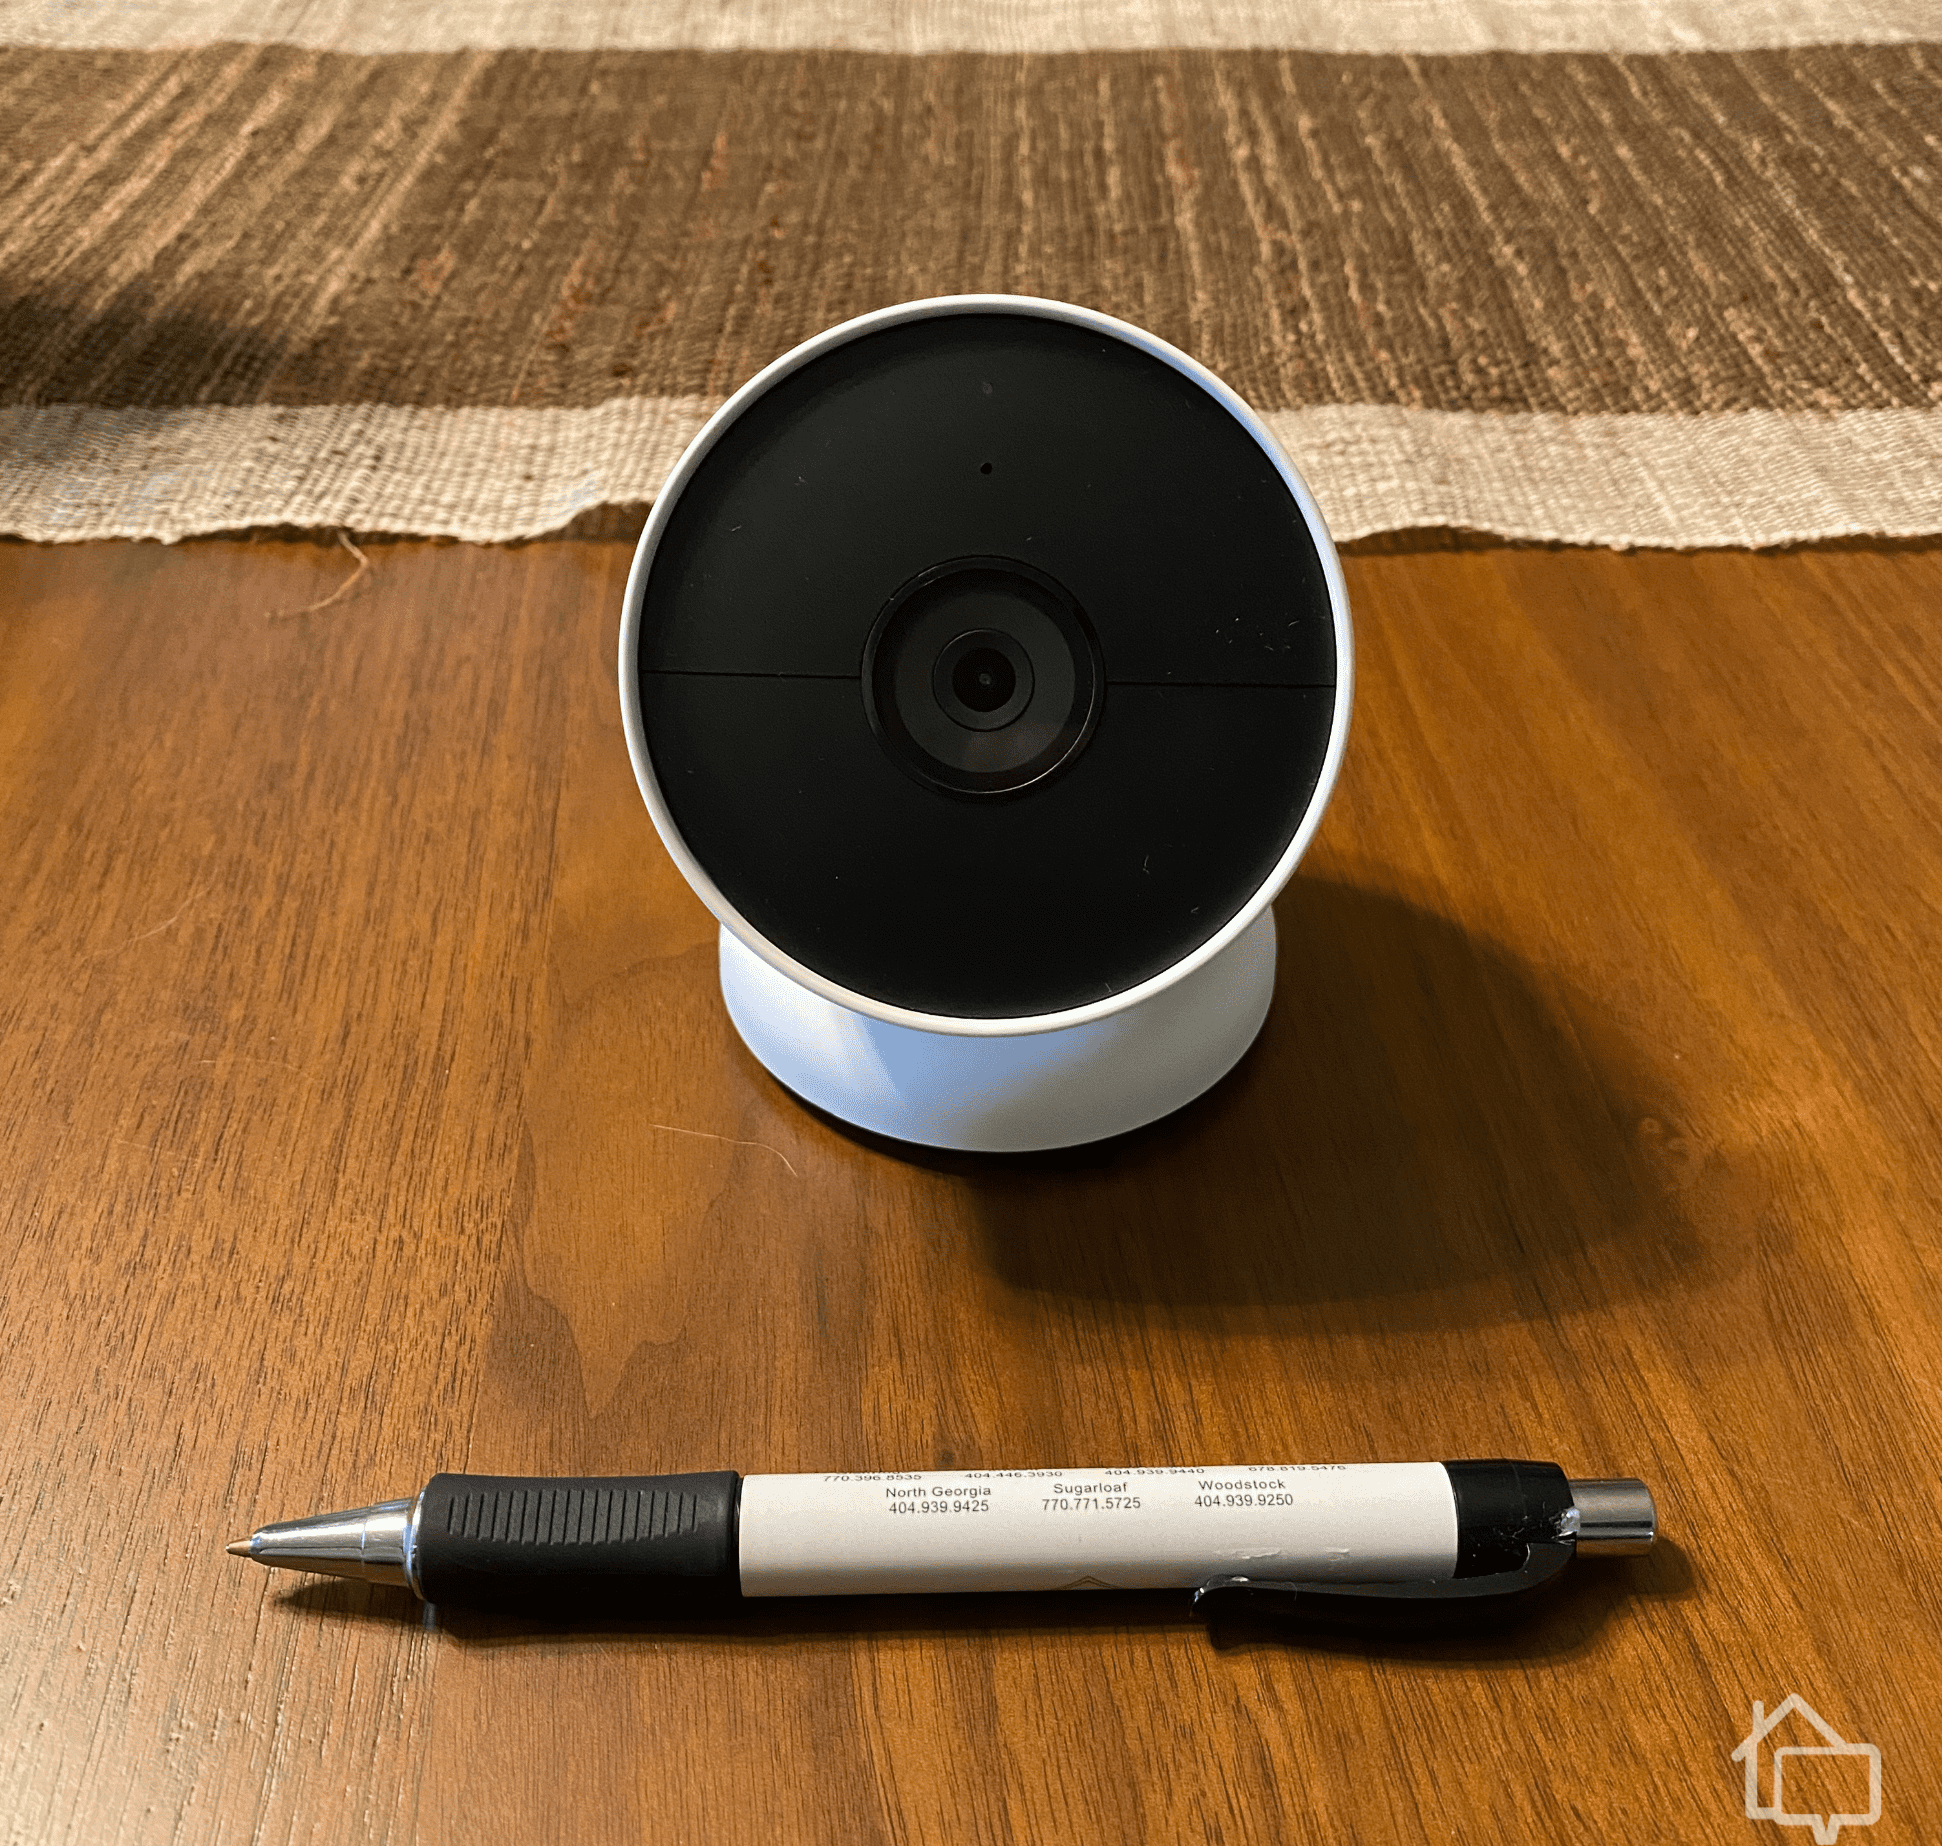 Google Nest Cams will start charging 25%-33% more per month to record video